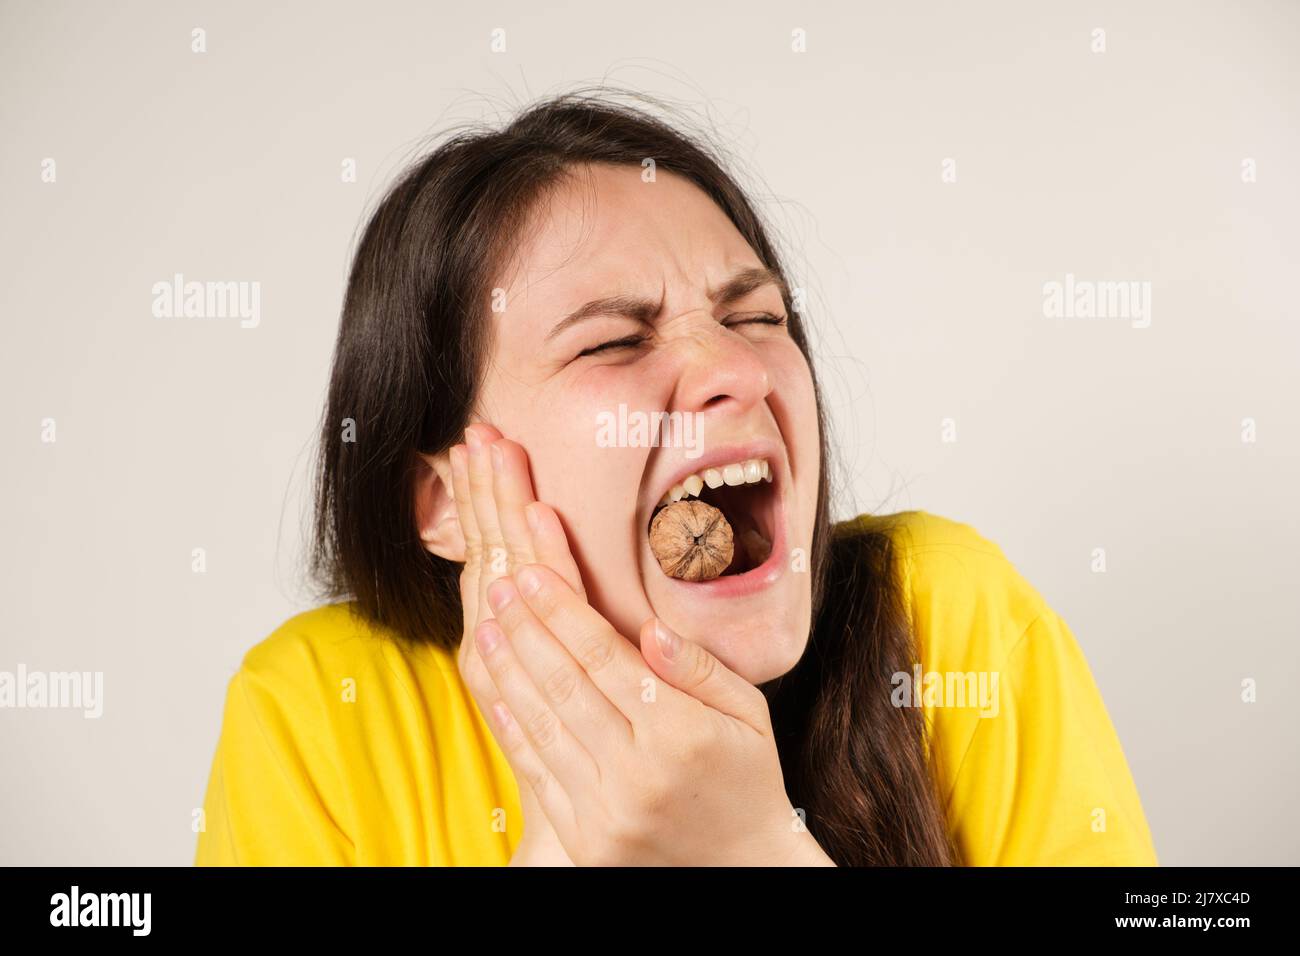 A woman gnaws on a walnut, opening her mouth wide, breaking a tooth or dislocating the temporomandibular joint, her jaw has moved away. Stock Photo